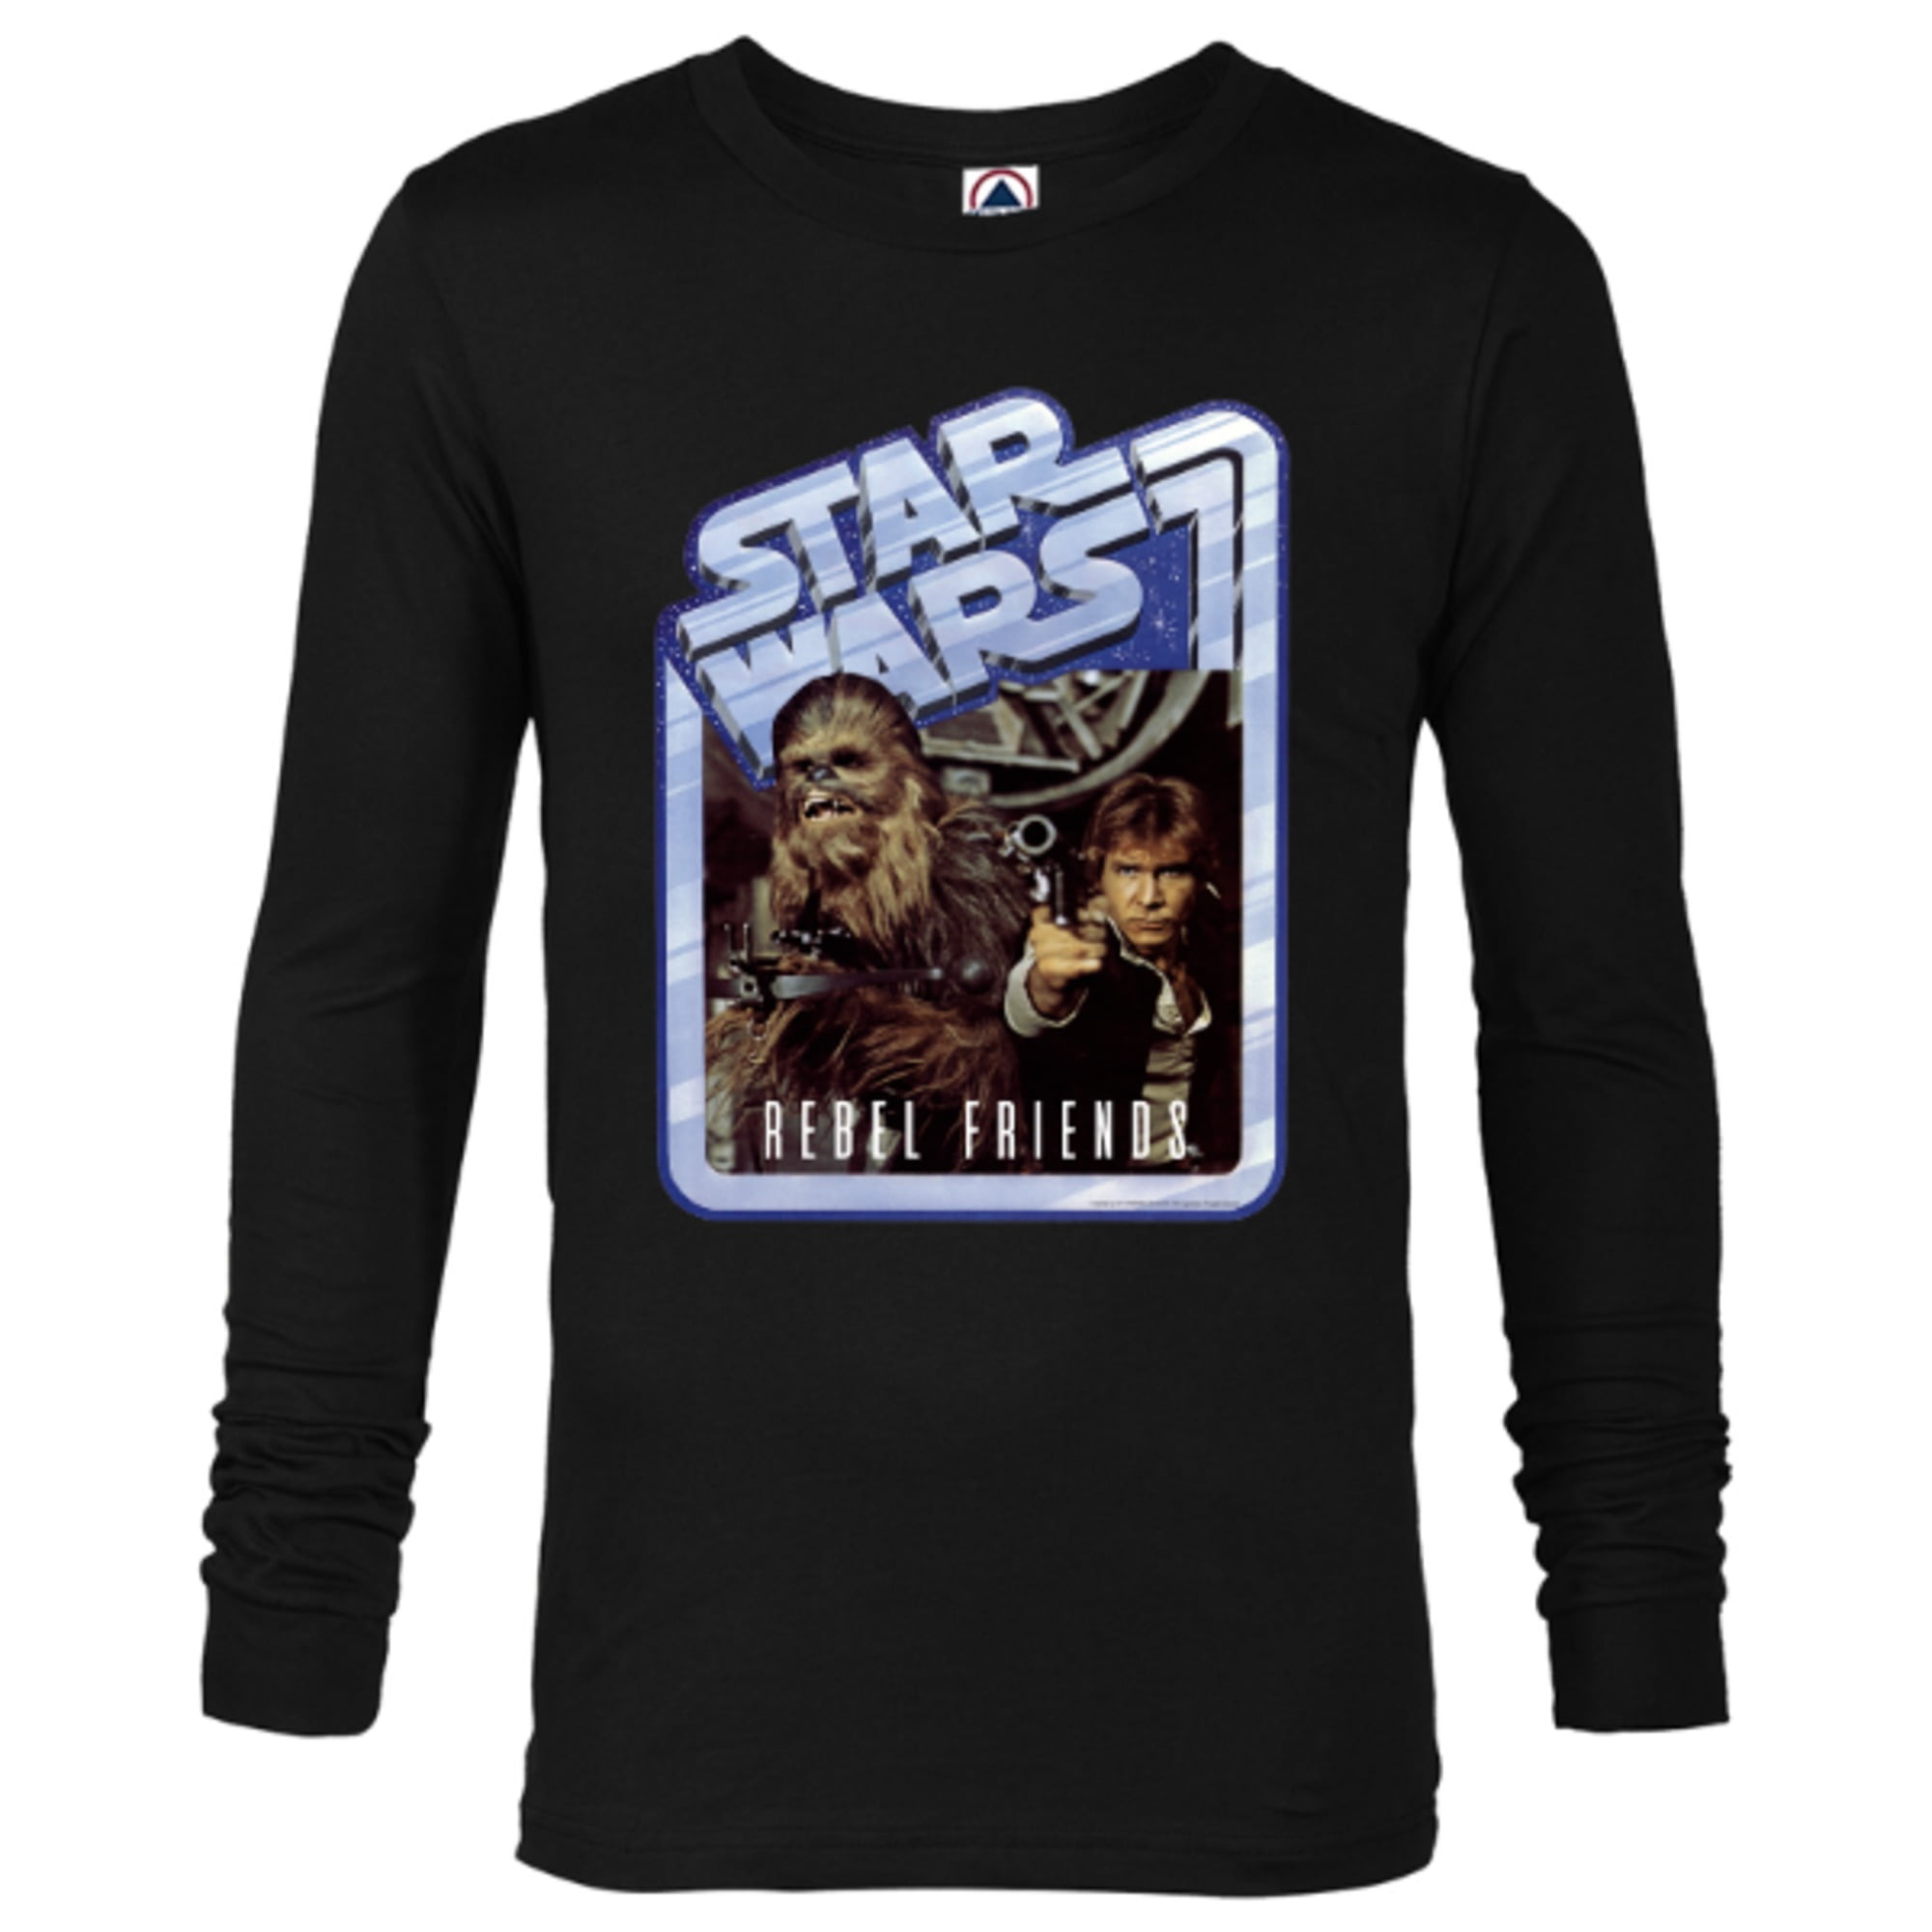 Star Wars Chewbacca and Han Solo Rebel Friends - Long Sleeve T-Shirt for Men - Customized-Black -